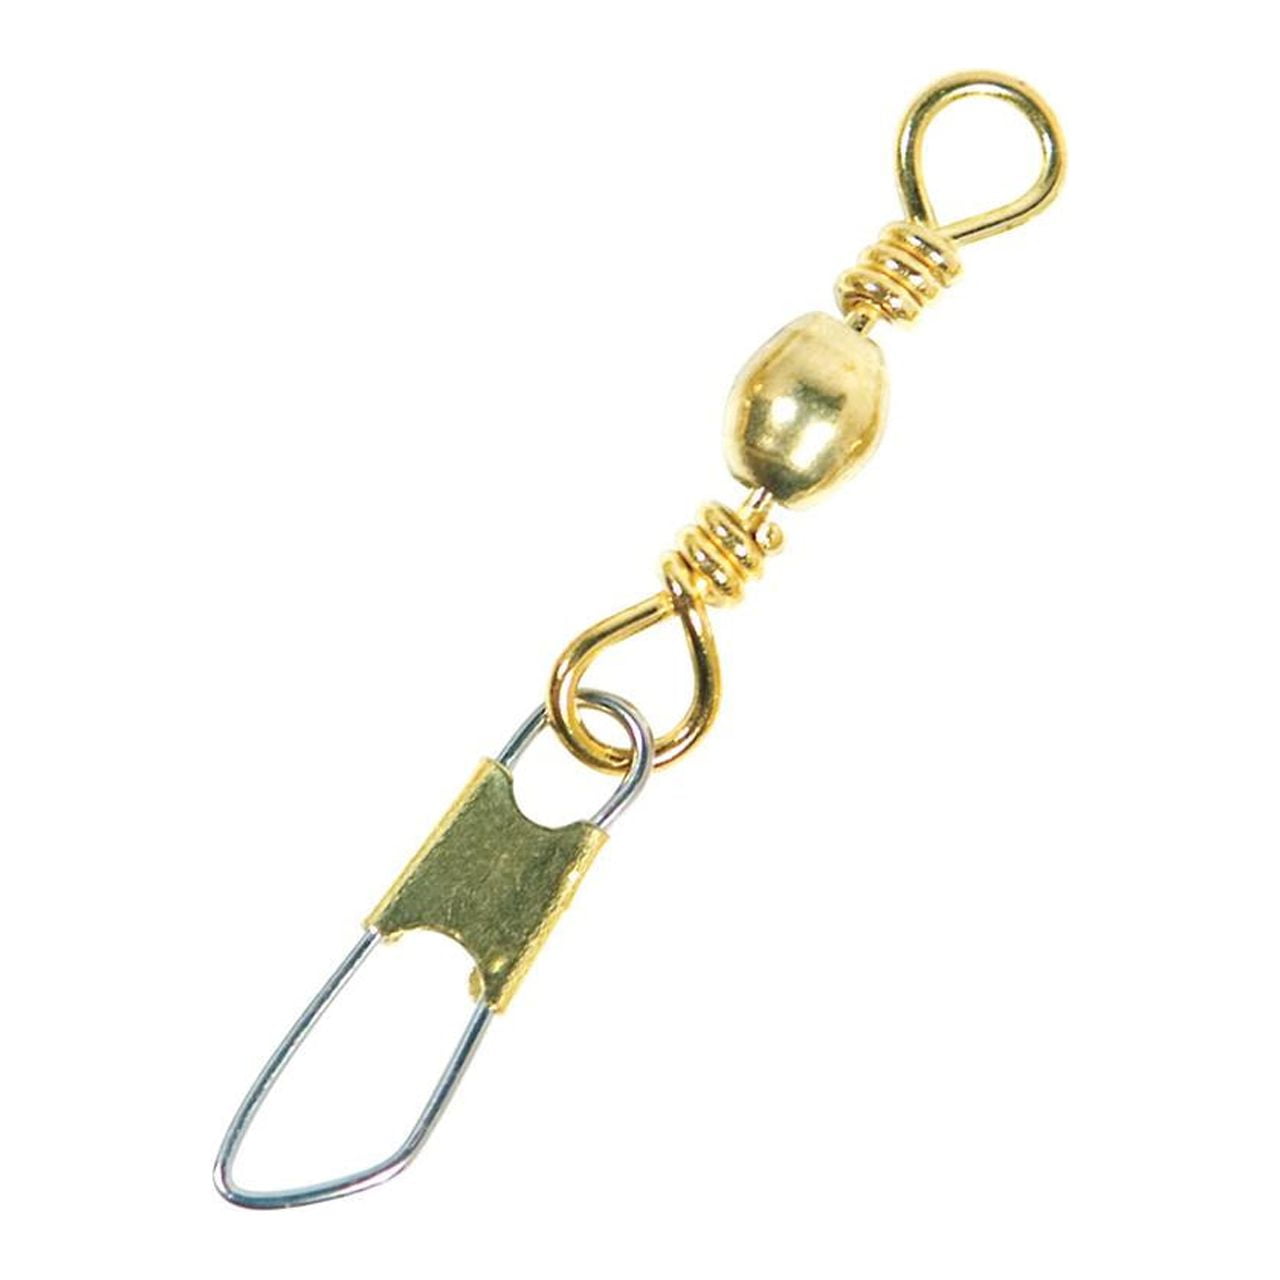 Eagle Claw Fishing, SS1212 Barrel Swivel with Safety Snap, Size 12. 